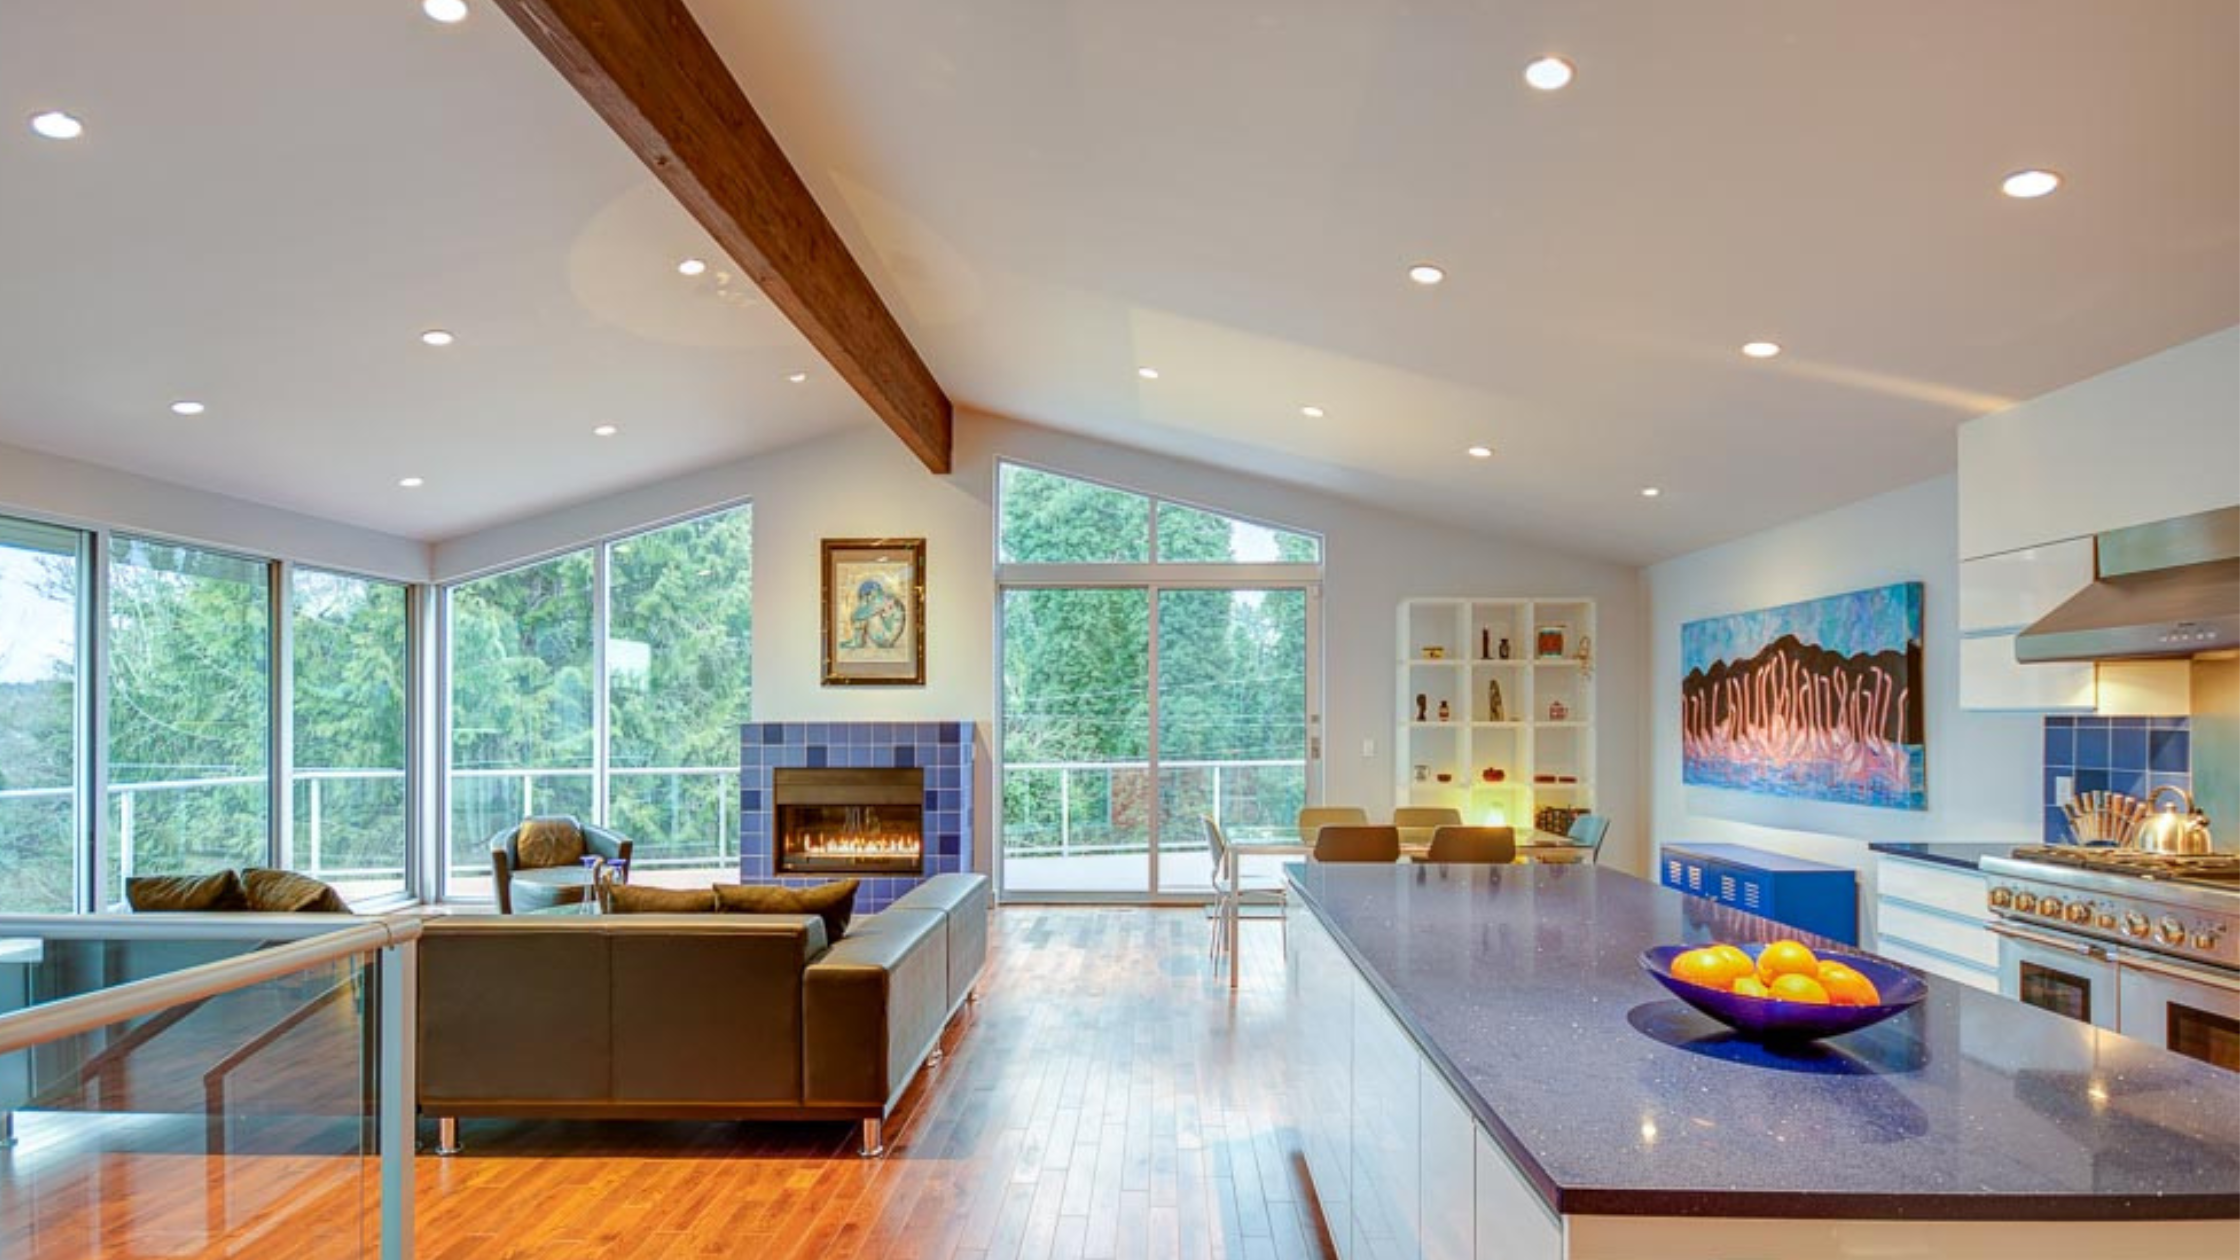 How To Design an Open Floor Plan That Actually Works: The Pros and Cons